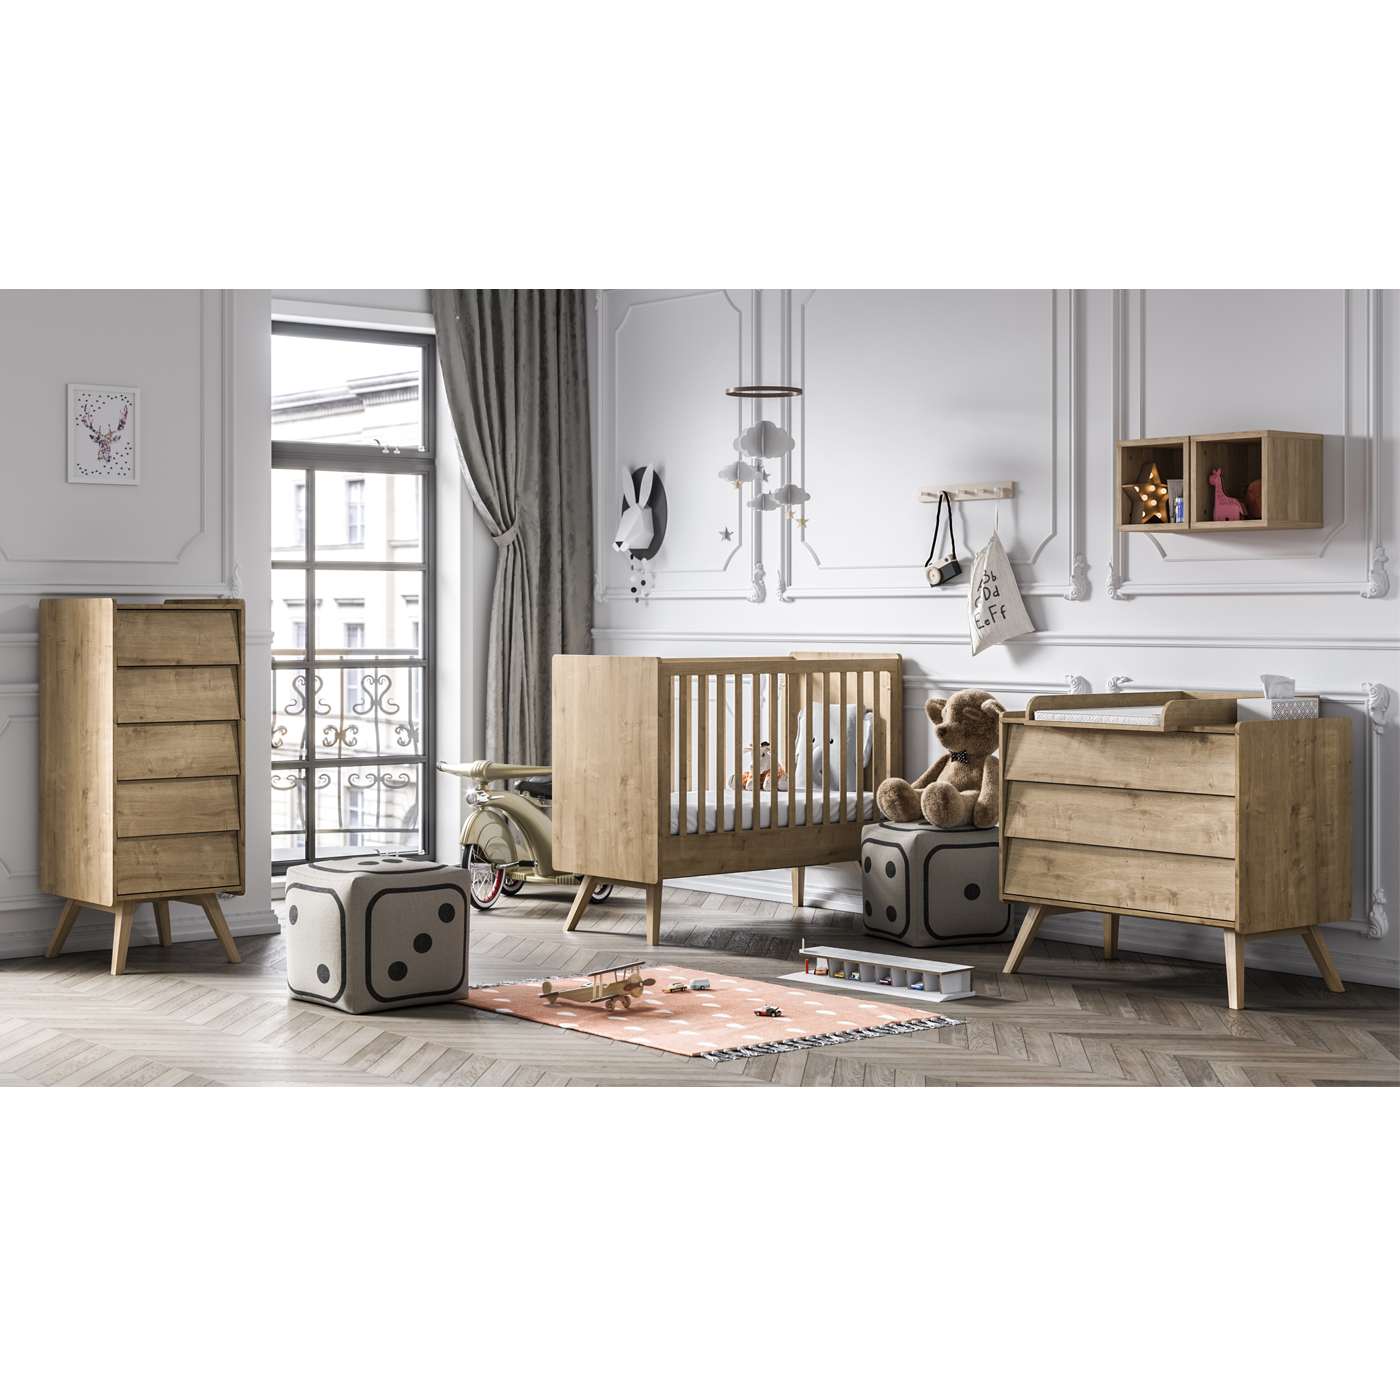 Chambre duo lit 60x120 cm + commode 3 tiroirs Access bois - Made